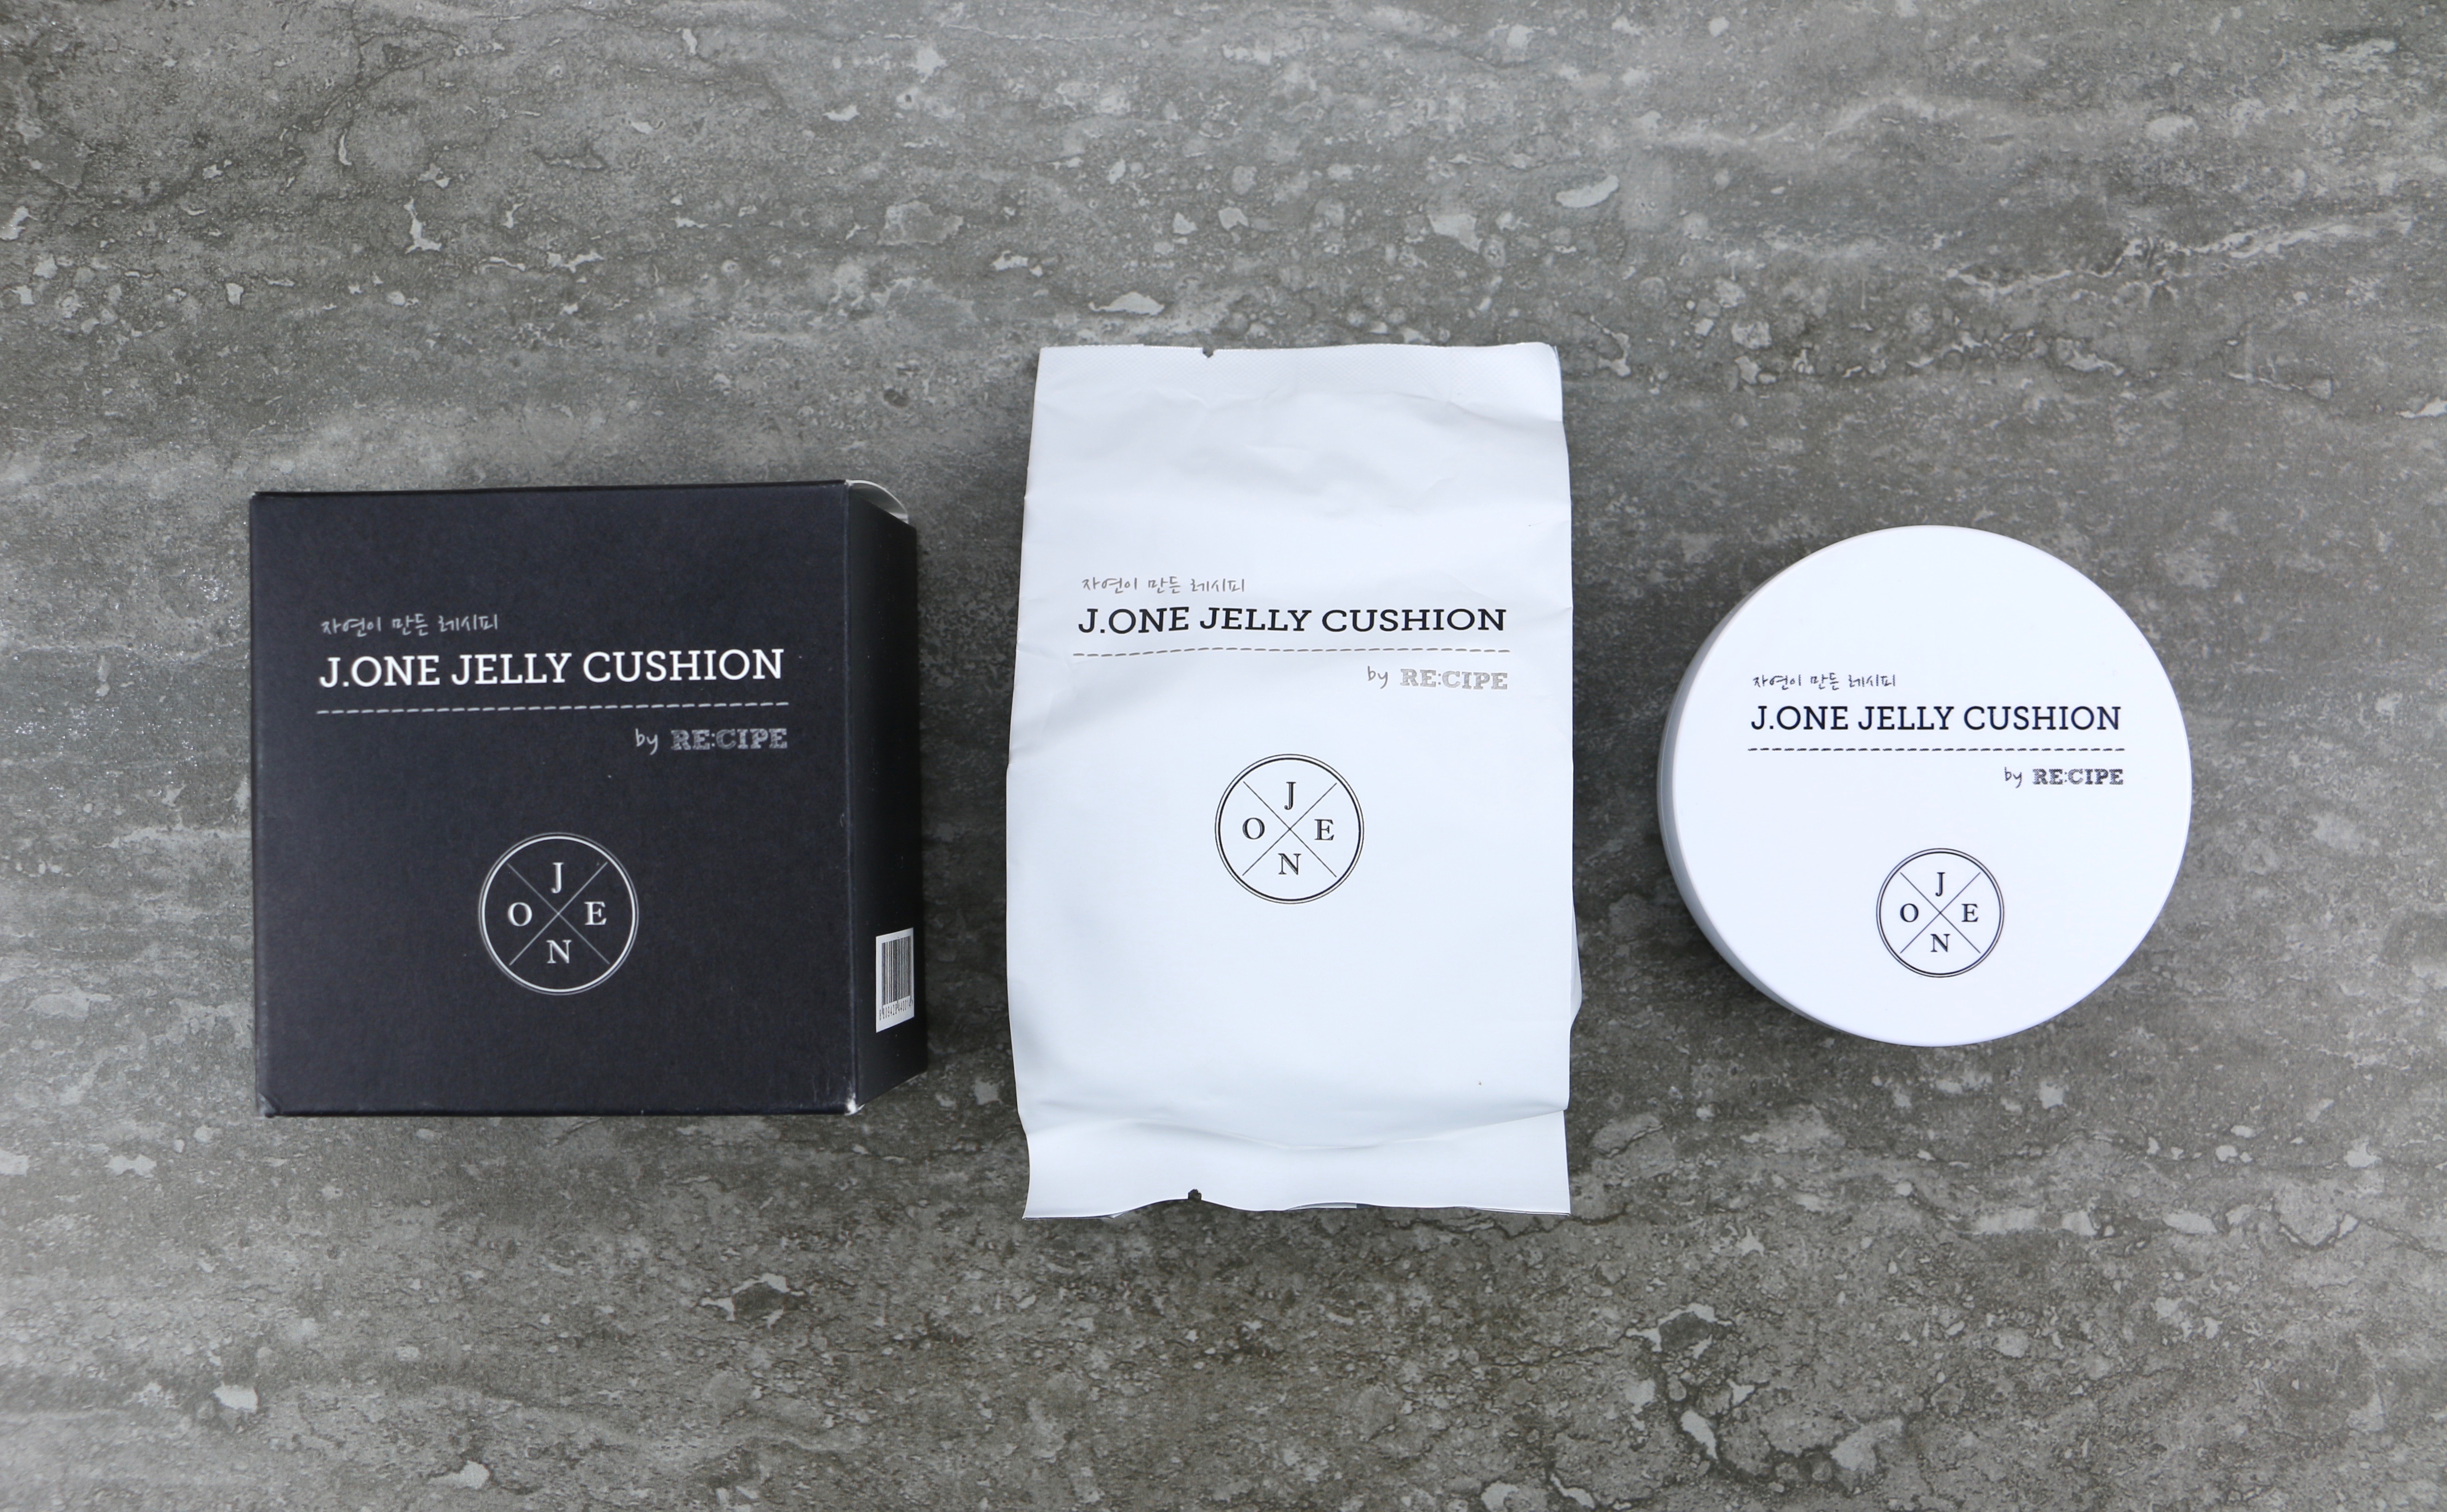 J.one jelly cushion review